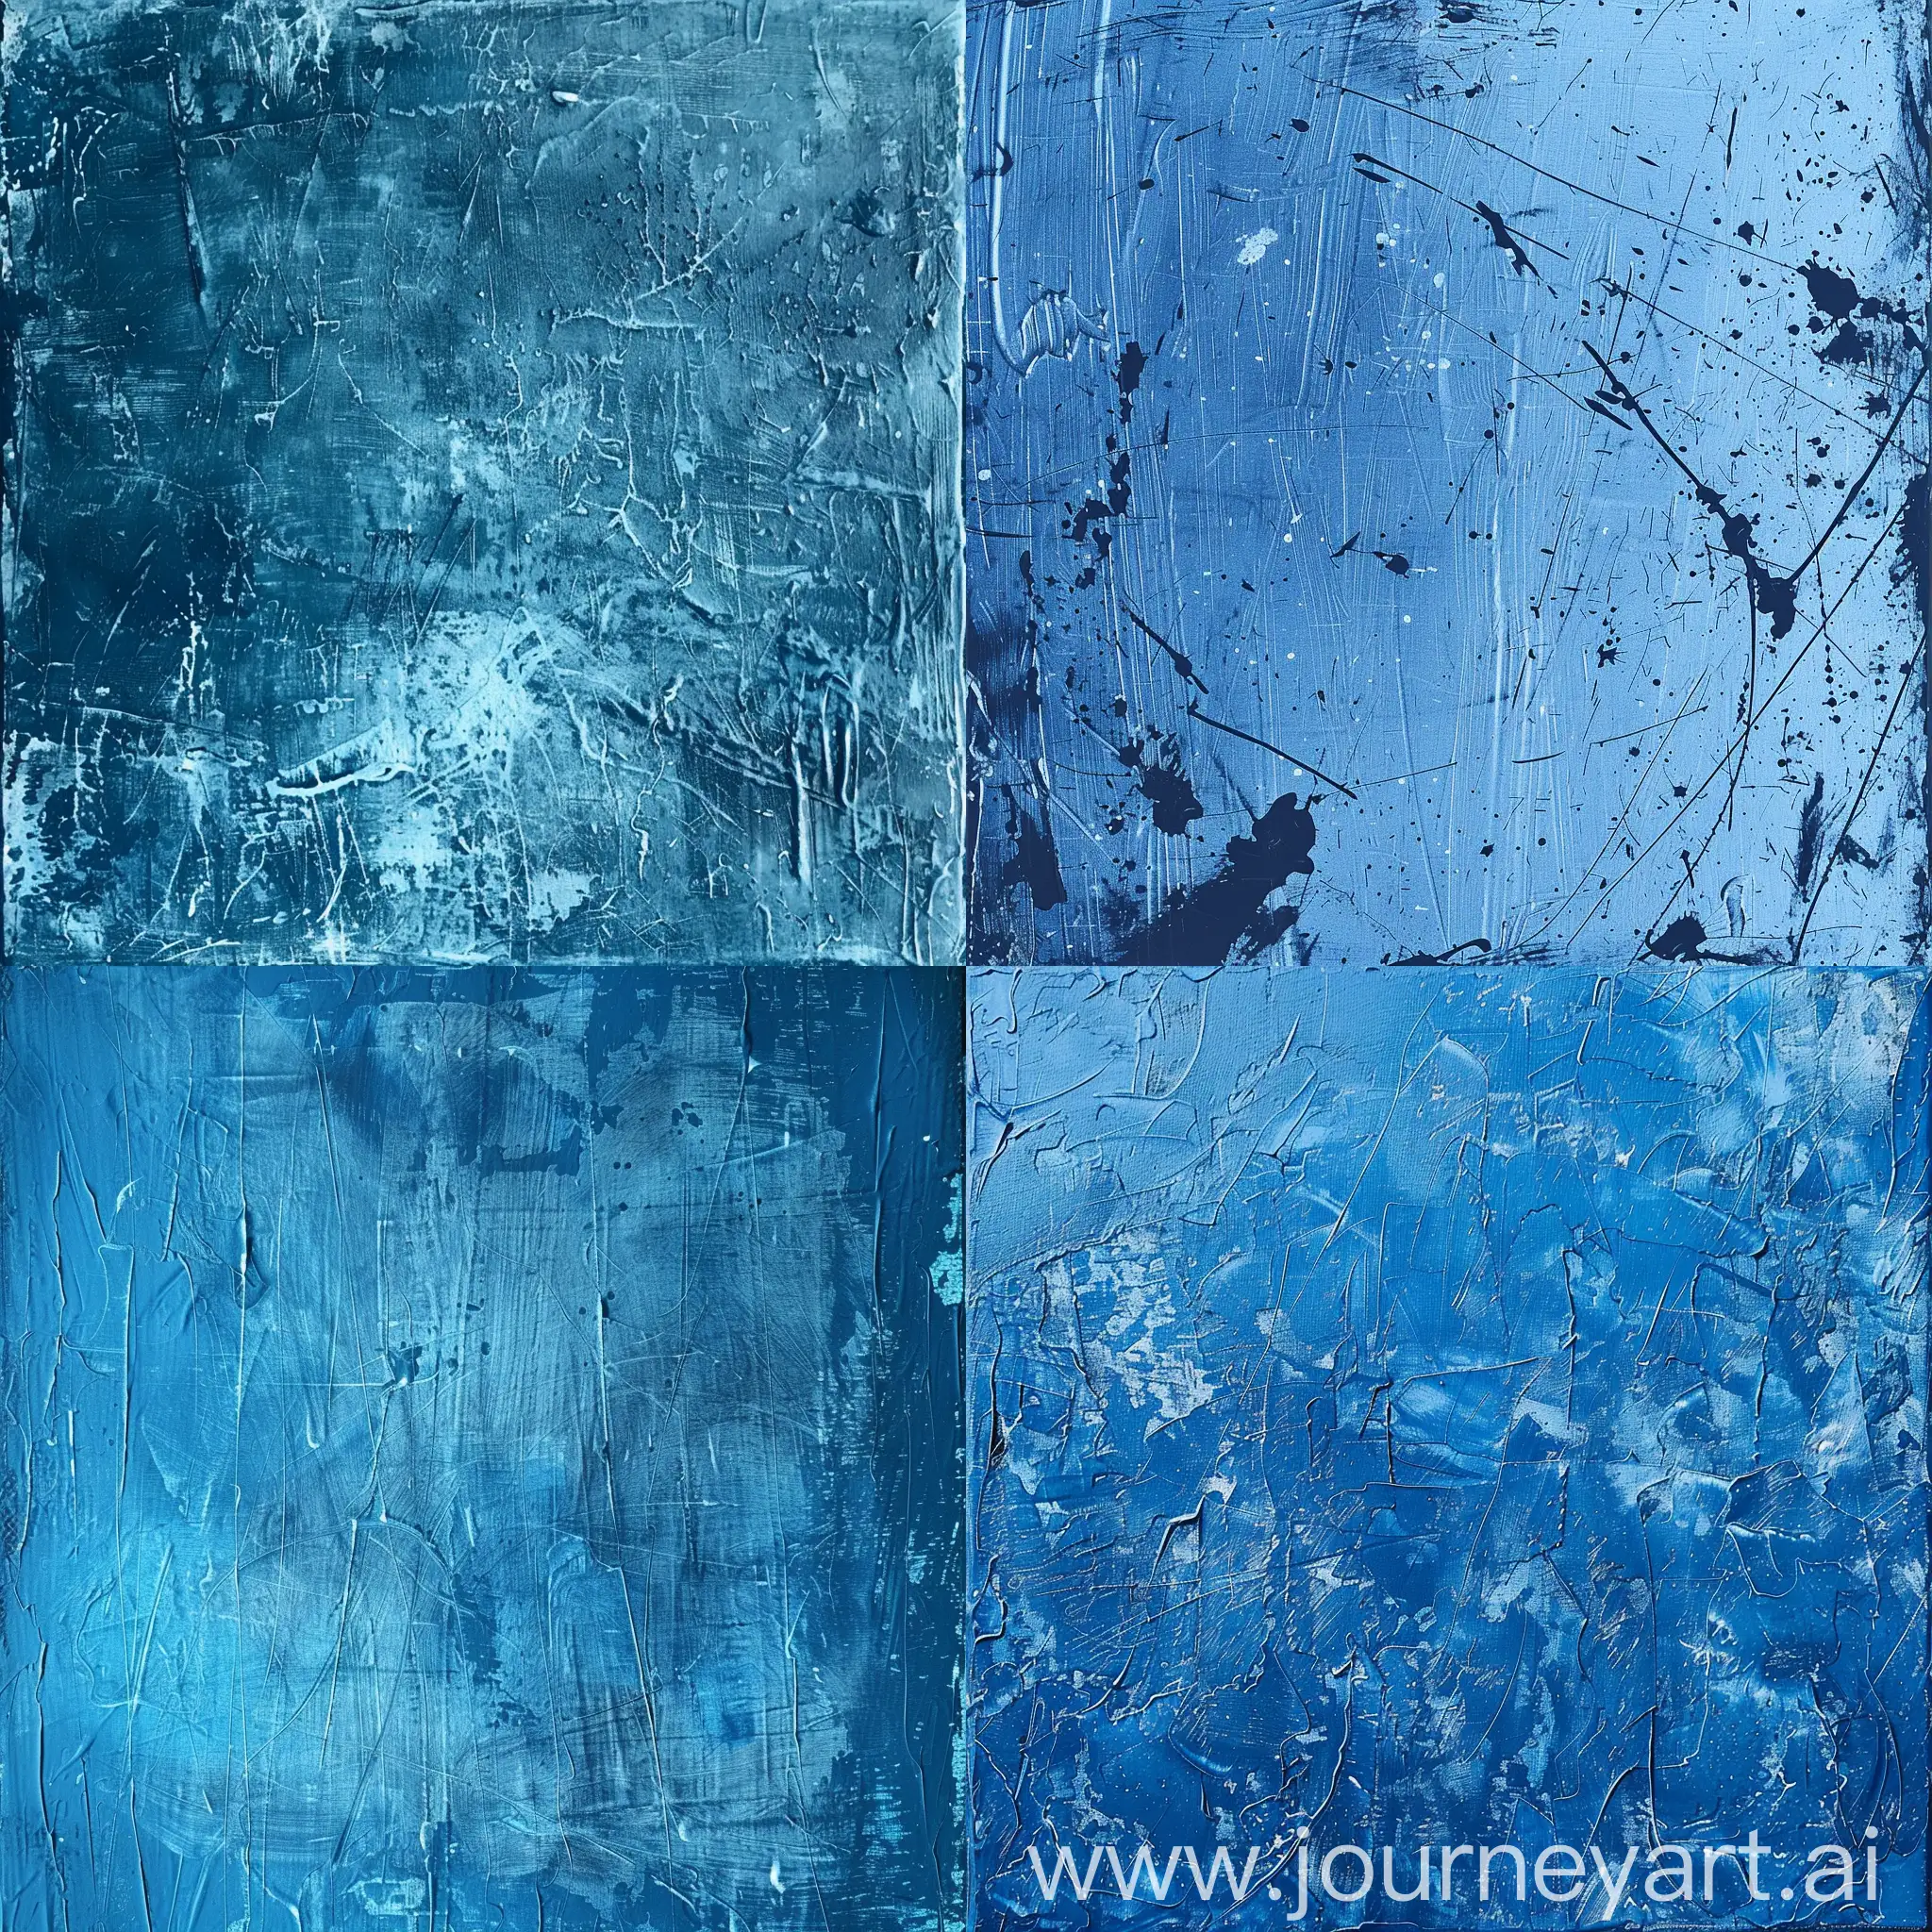 BLUE MONOCHROME BACKGROUND WITH SCUFFS LIKE PAINT